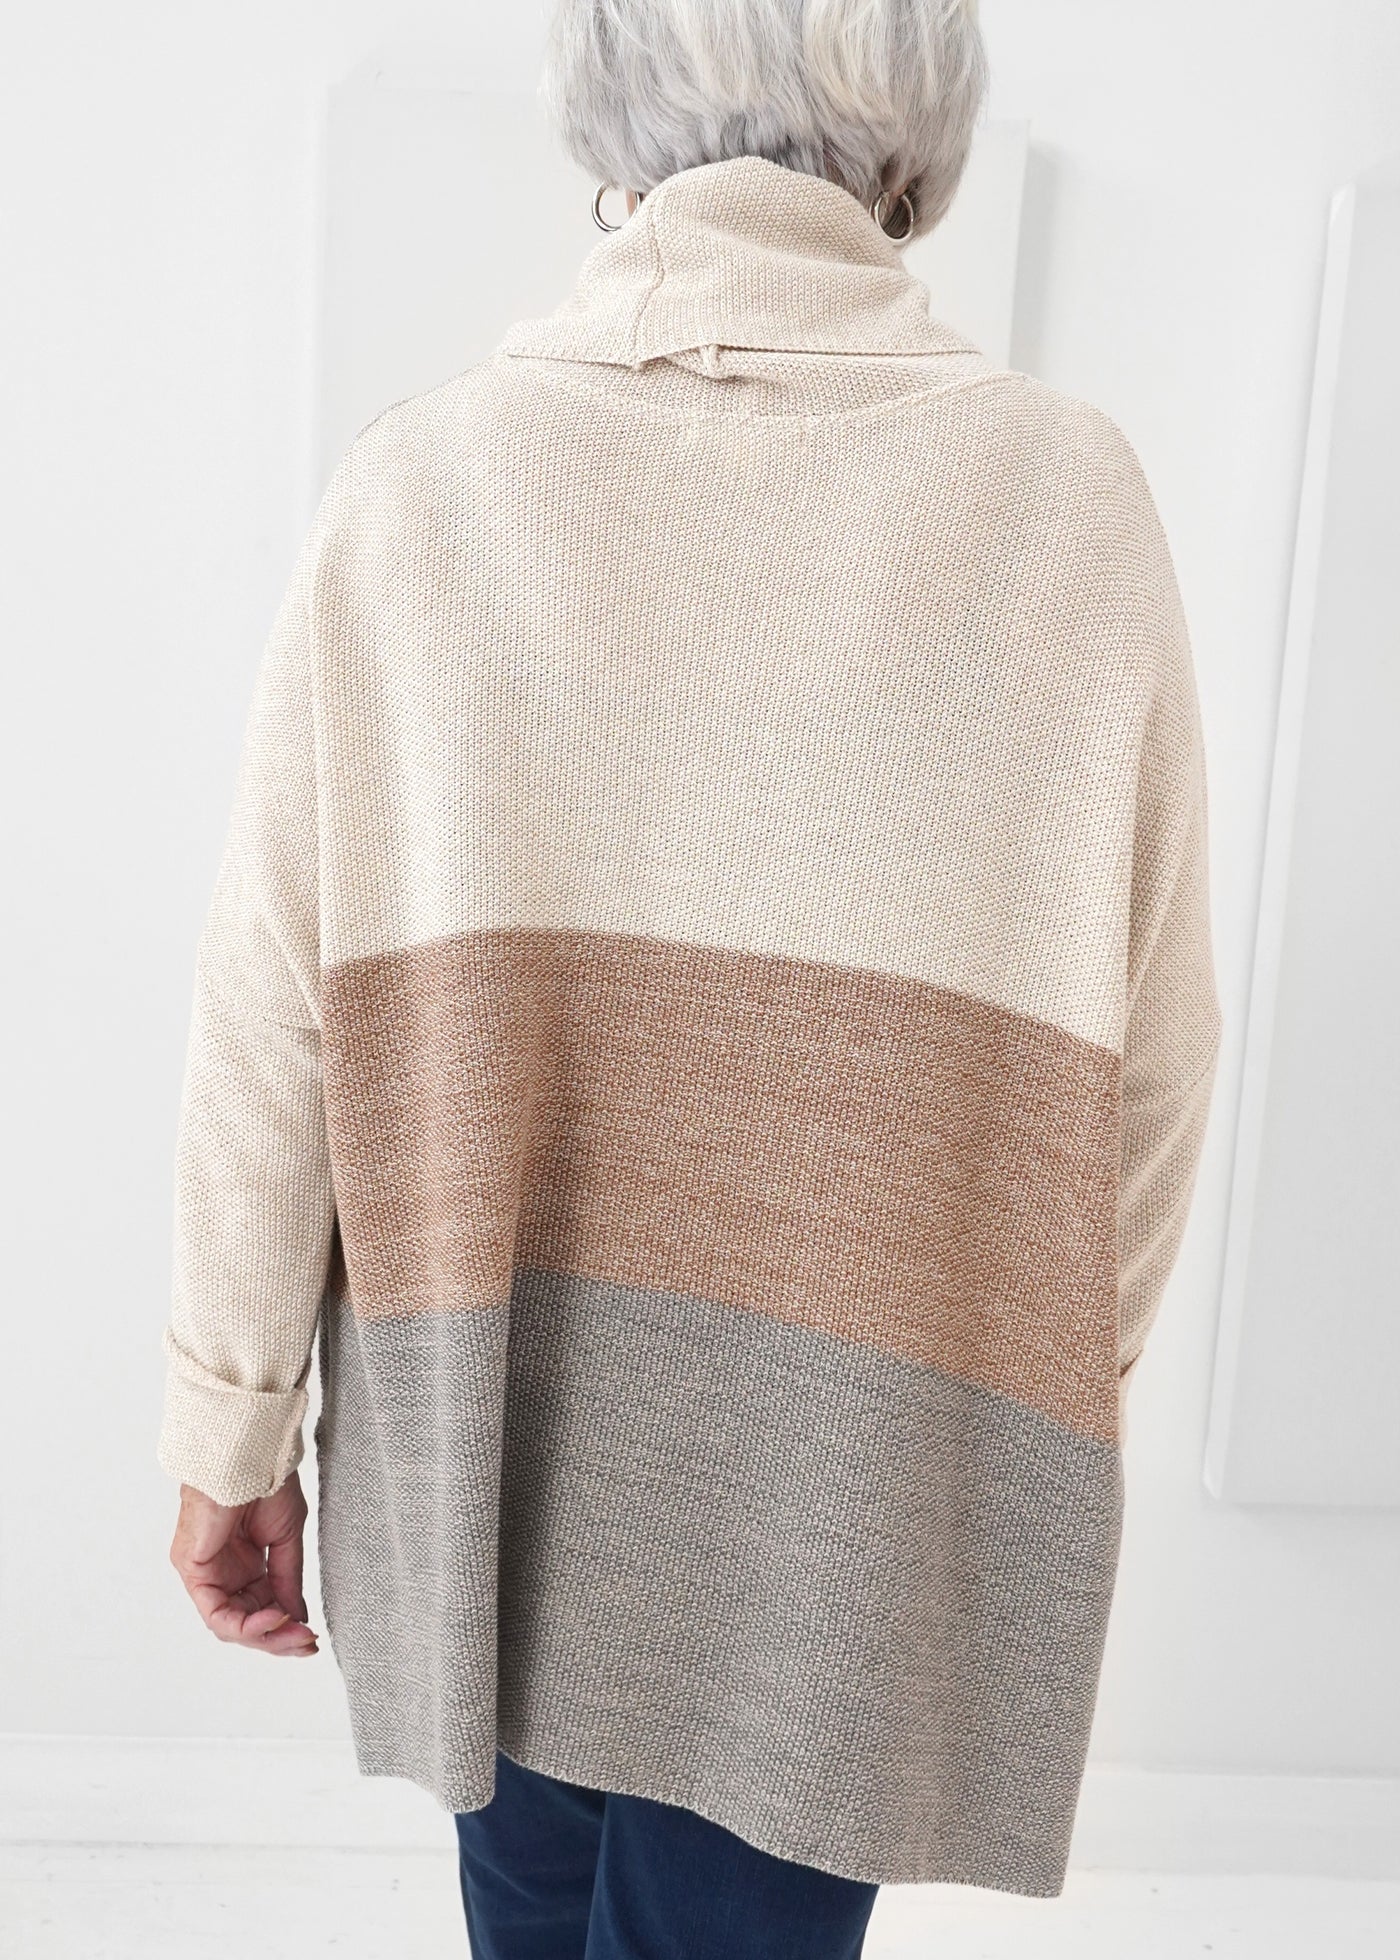 Cotton Country - Bailee Poncho Sweater